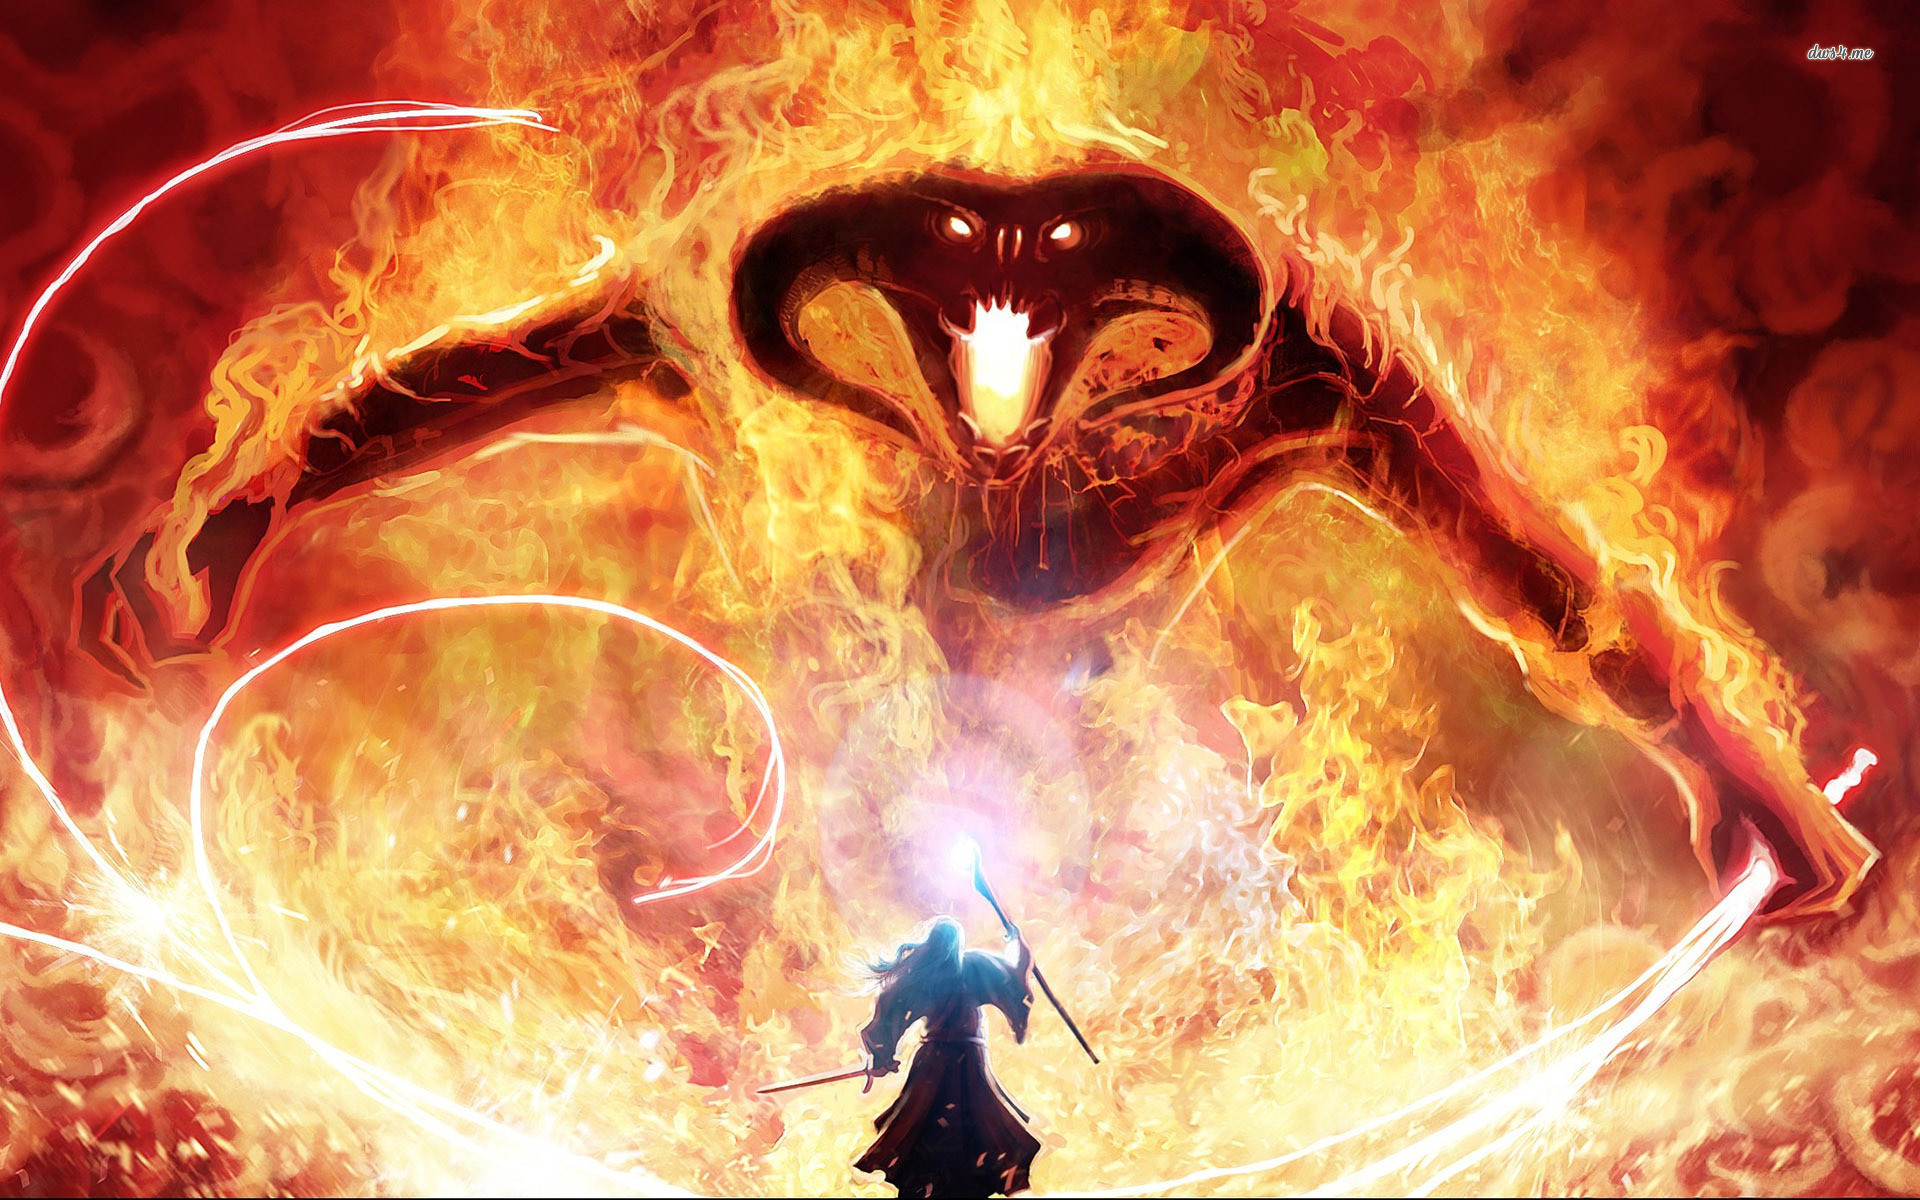 1920x1200, Gandalf And Balrog - Balrog Lord Of The Rings - HD Wallpaper 